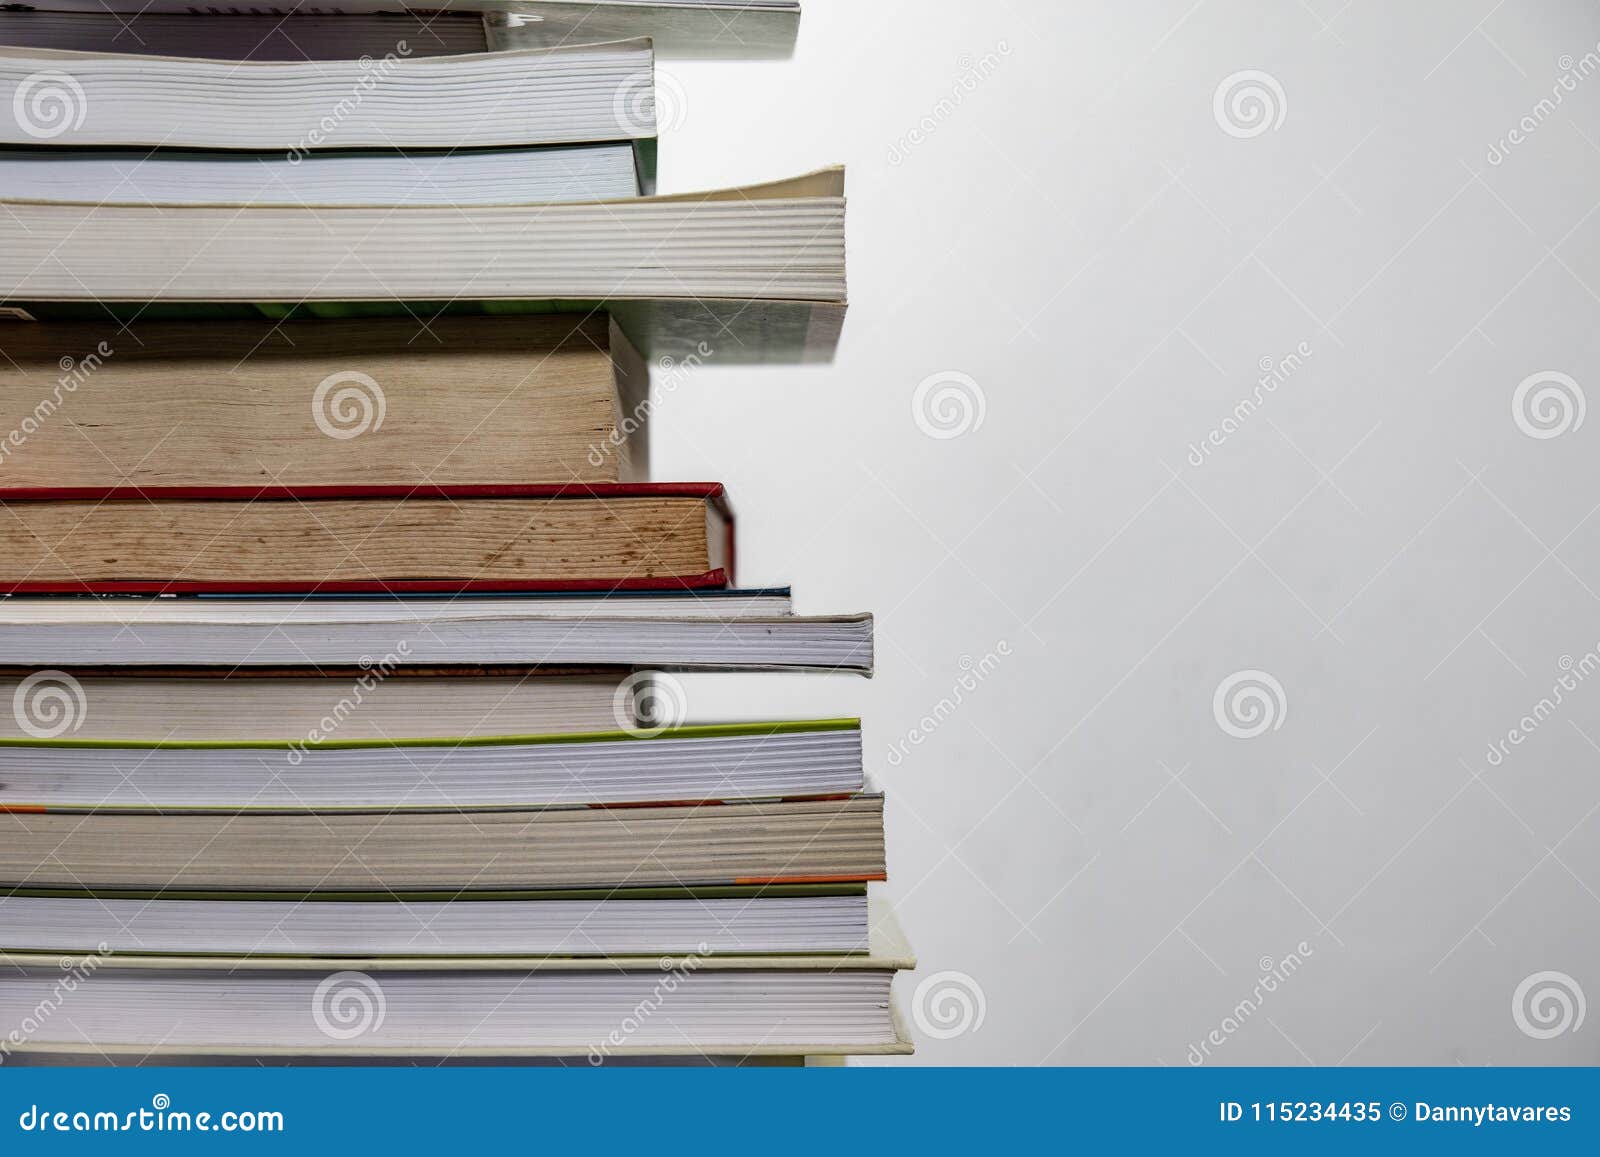 stack of boks in a white background